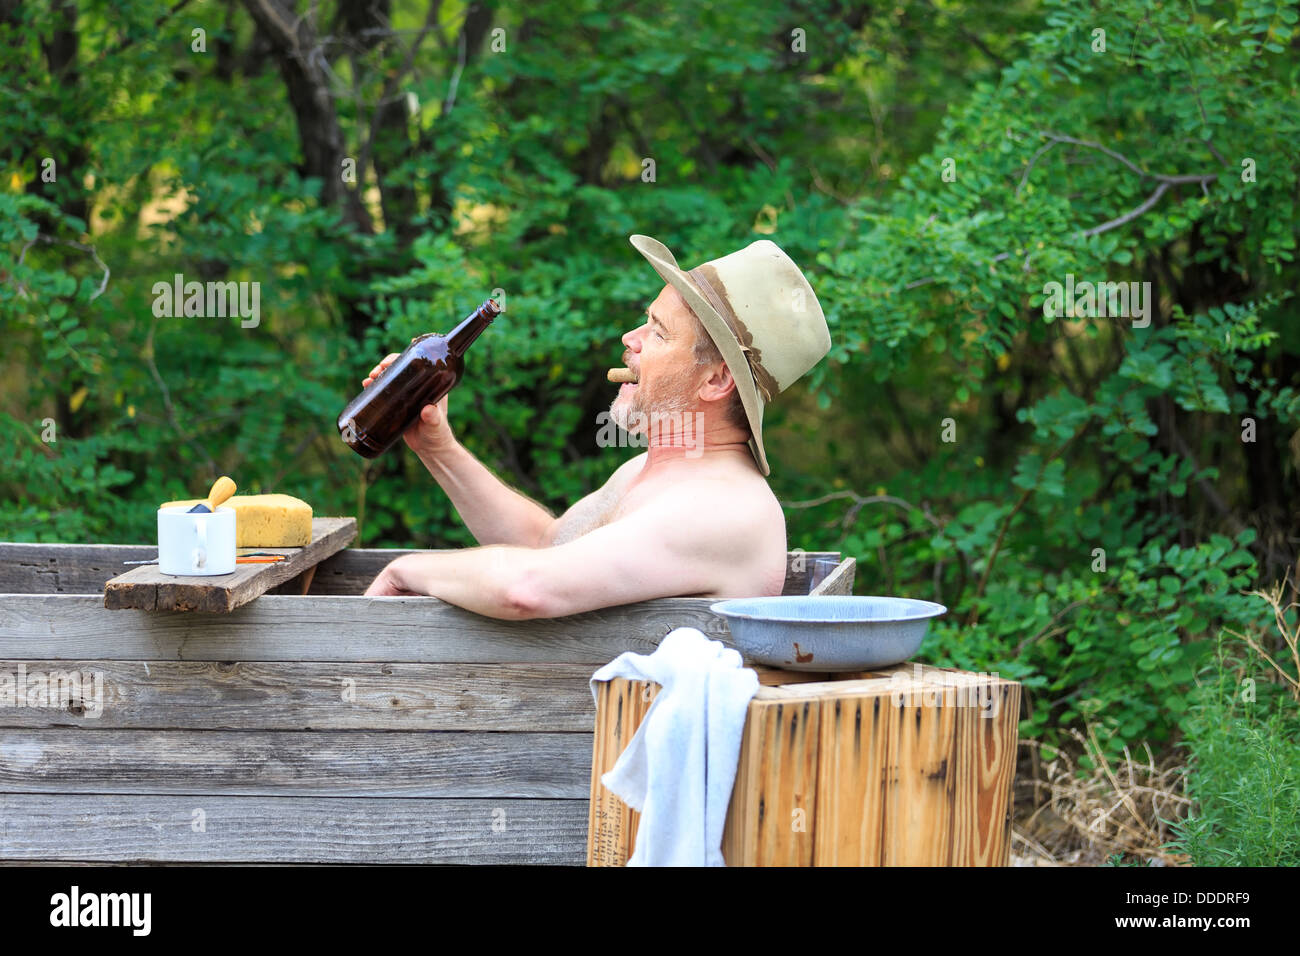 A Cowboy taking a drink from his whiskey bottle while bathing and shaving Stock Photo